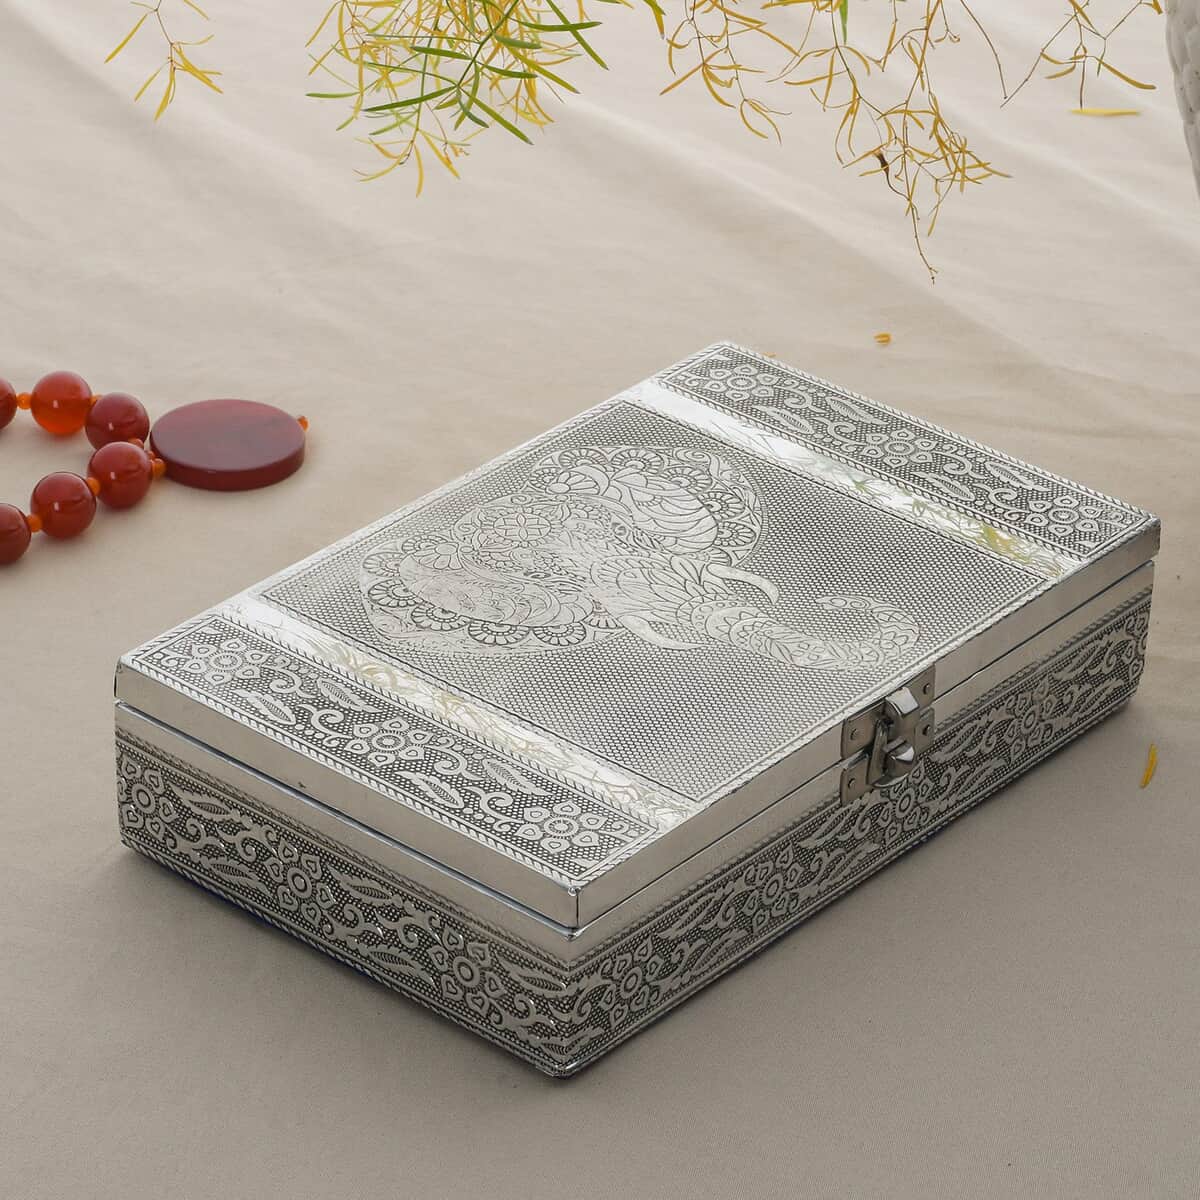 ADI'S EXCLUSIVE DEAL Aluminum Oxidized Elephant Face Pattern Half Empty and Half Ring Storage Jewelry Box with Anti Scratch Protection Interior image number 1